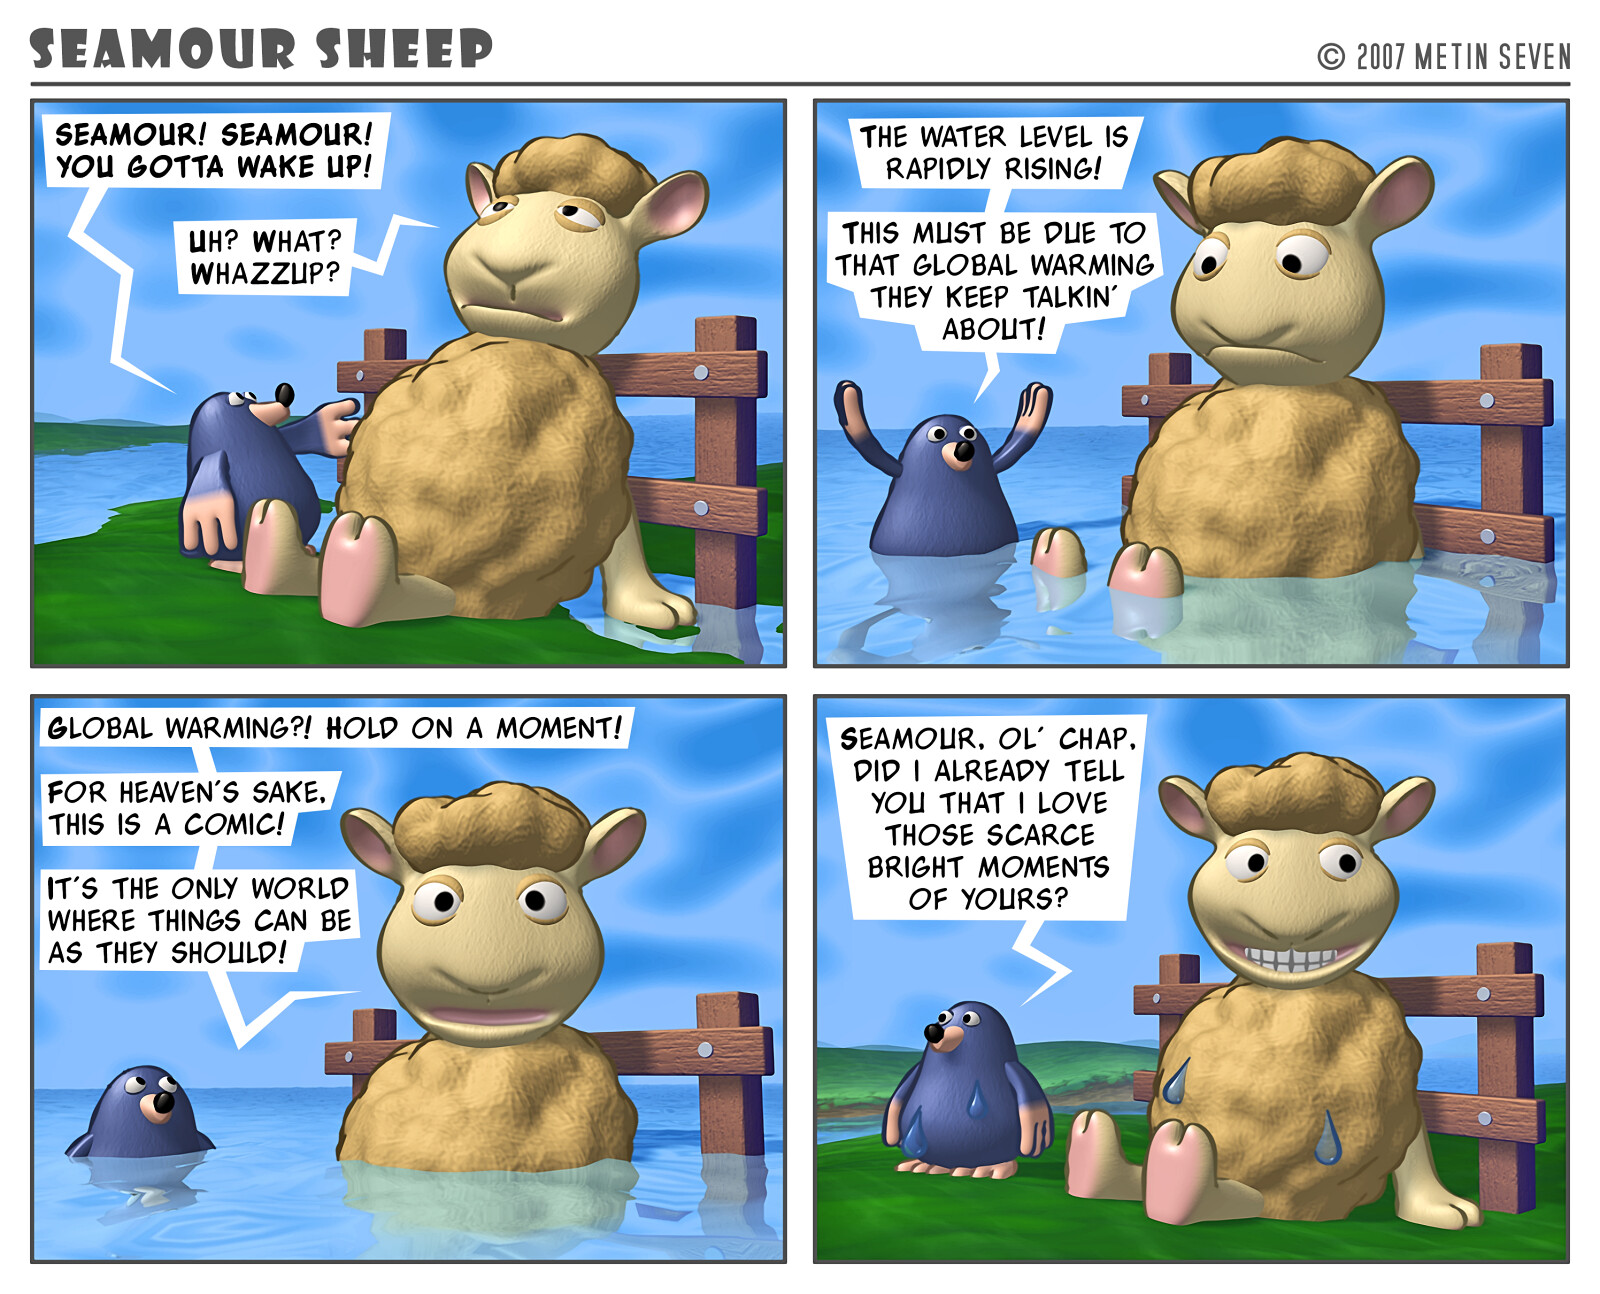 Seamour Sheep and Marty Mole comic strip episode: Global warming